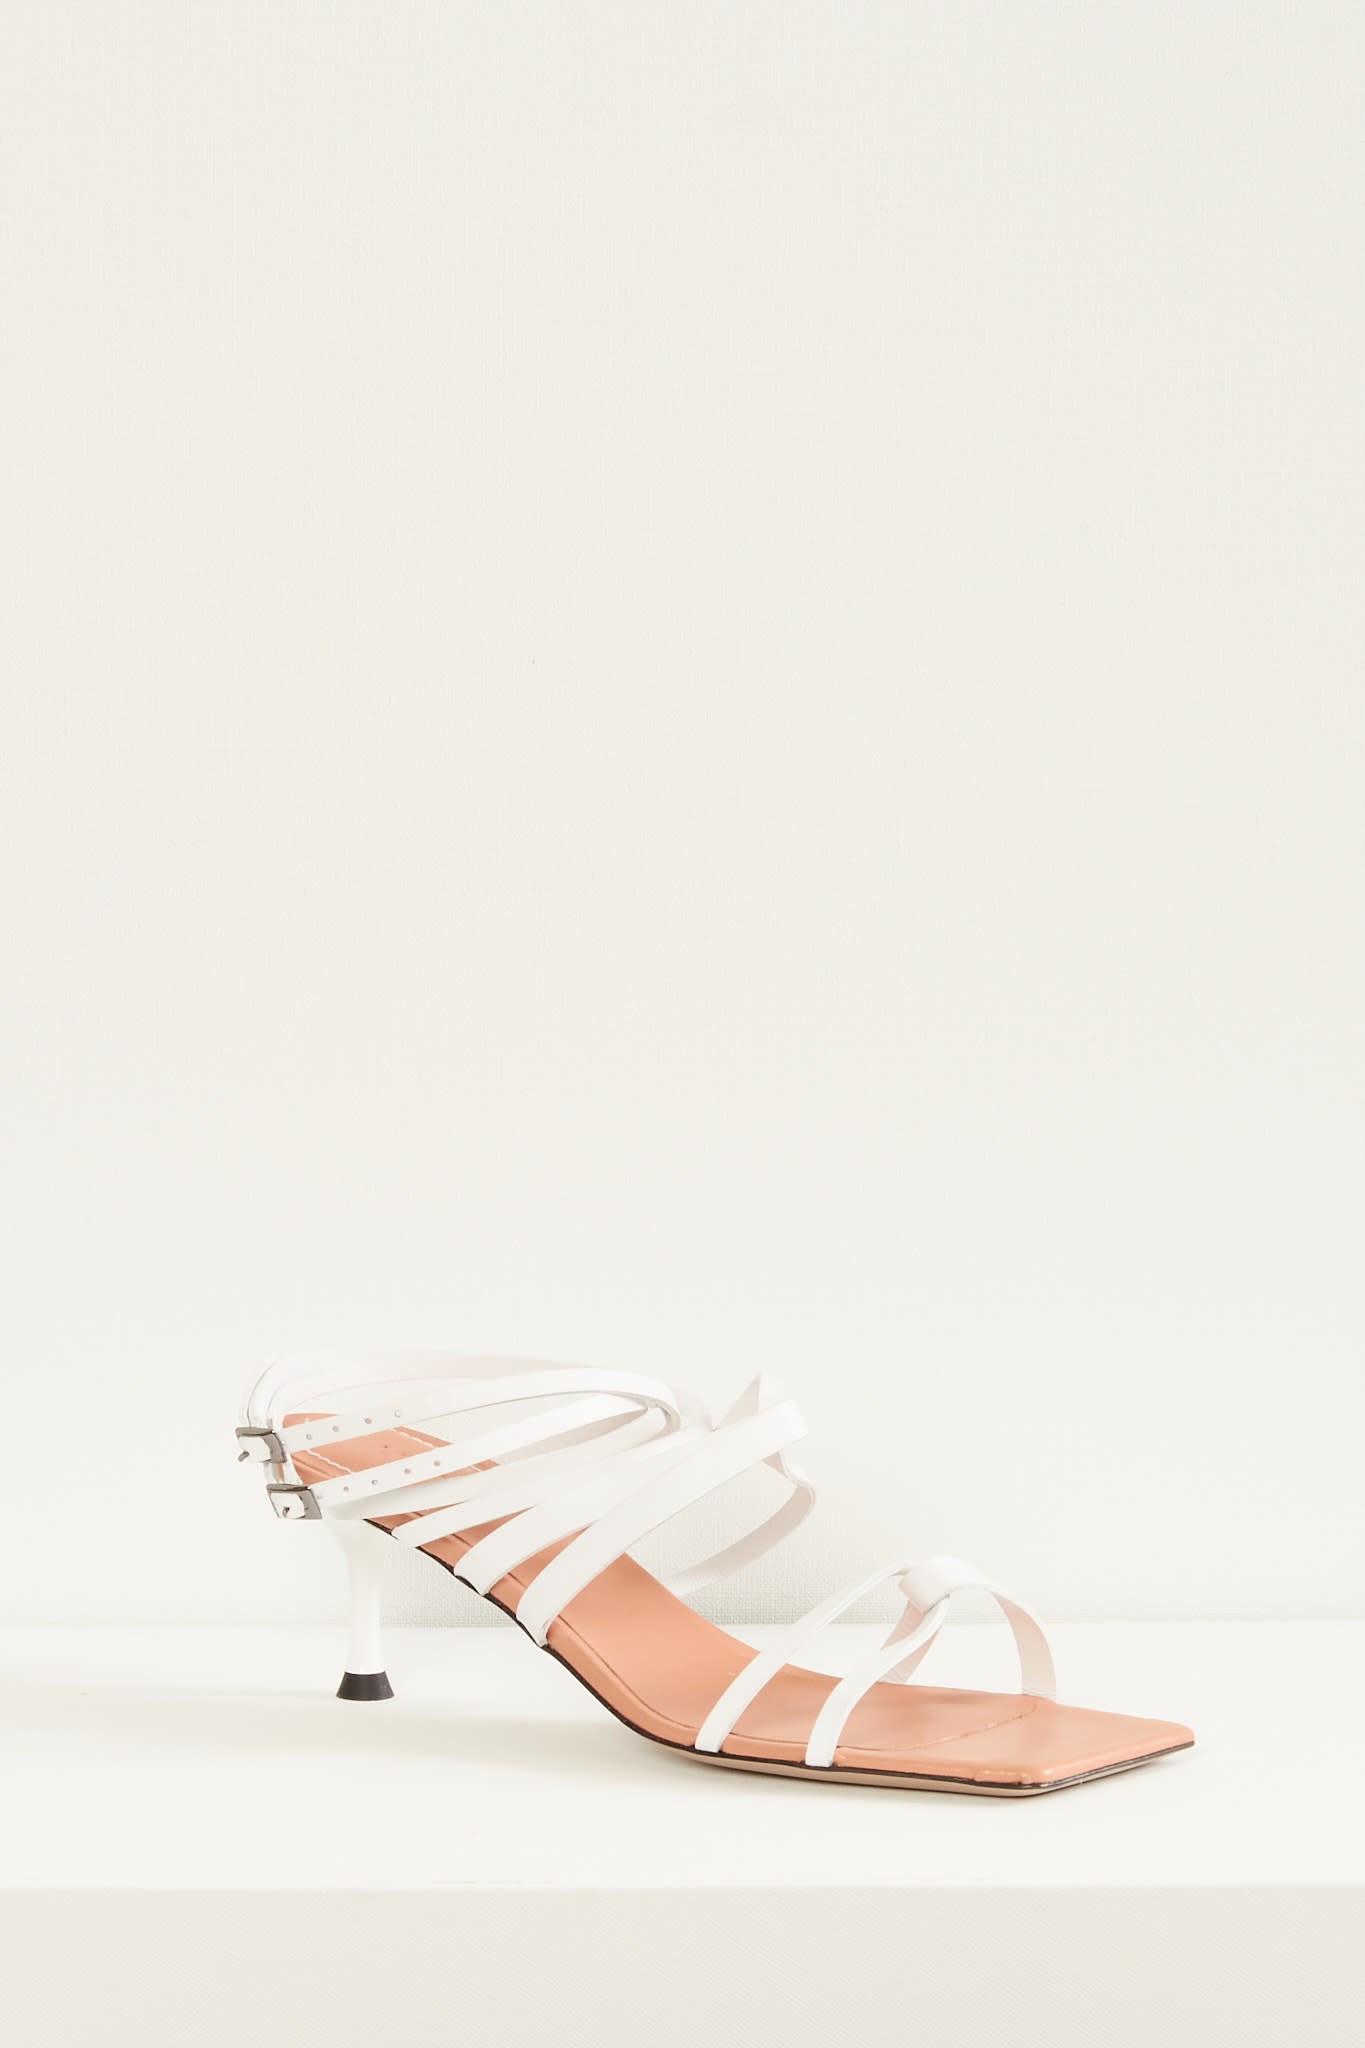  - Polly flat leather sandals